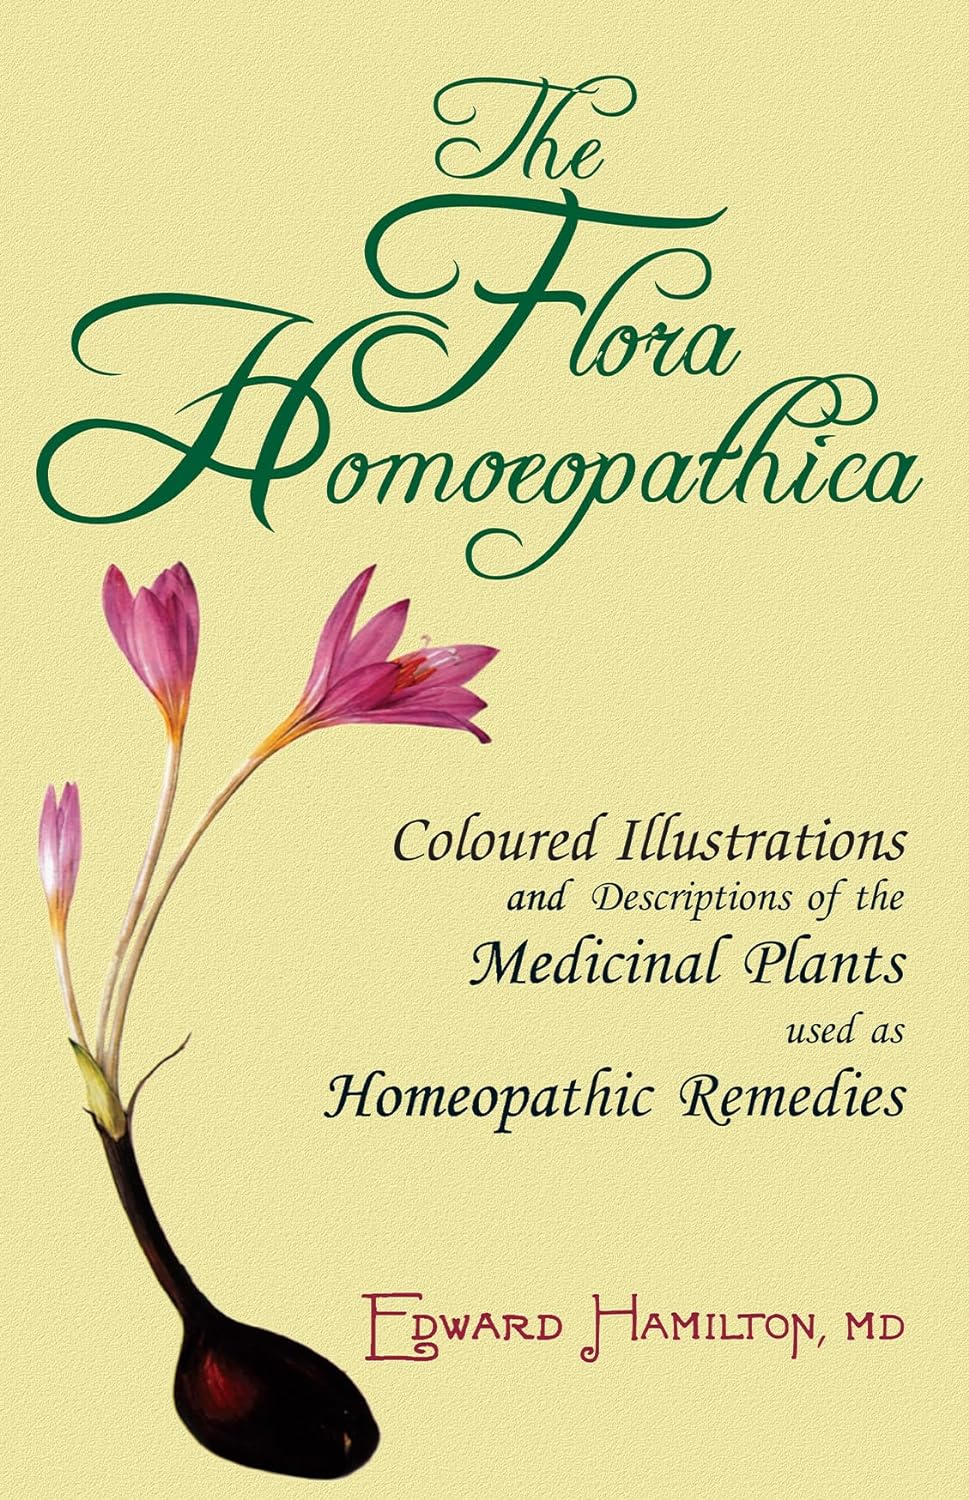 The Flora Homoeopathica (66 Colored Illustrations & Descriptions Of Medicinal Plants)